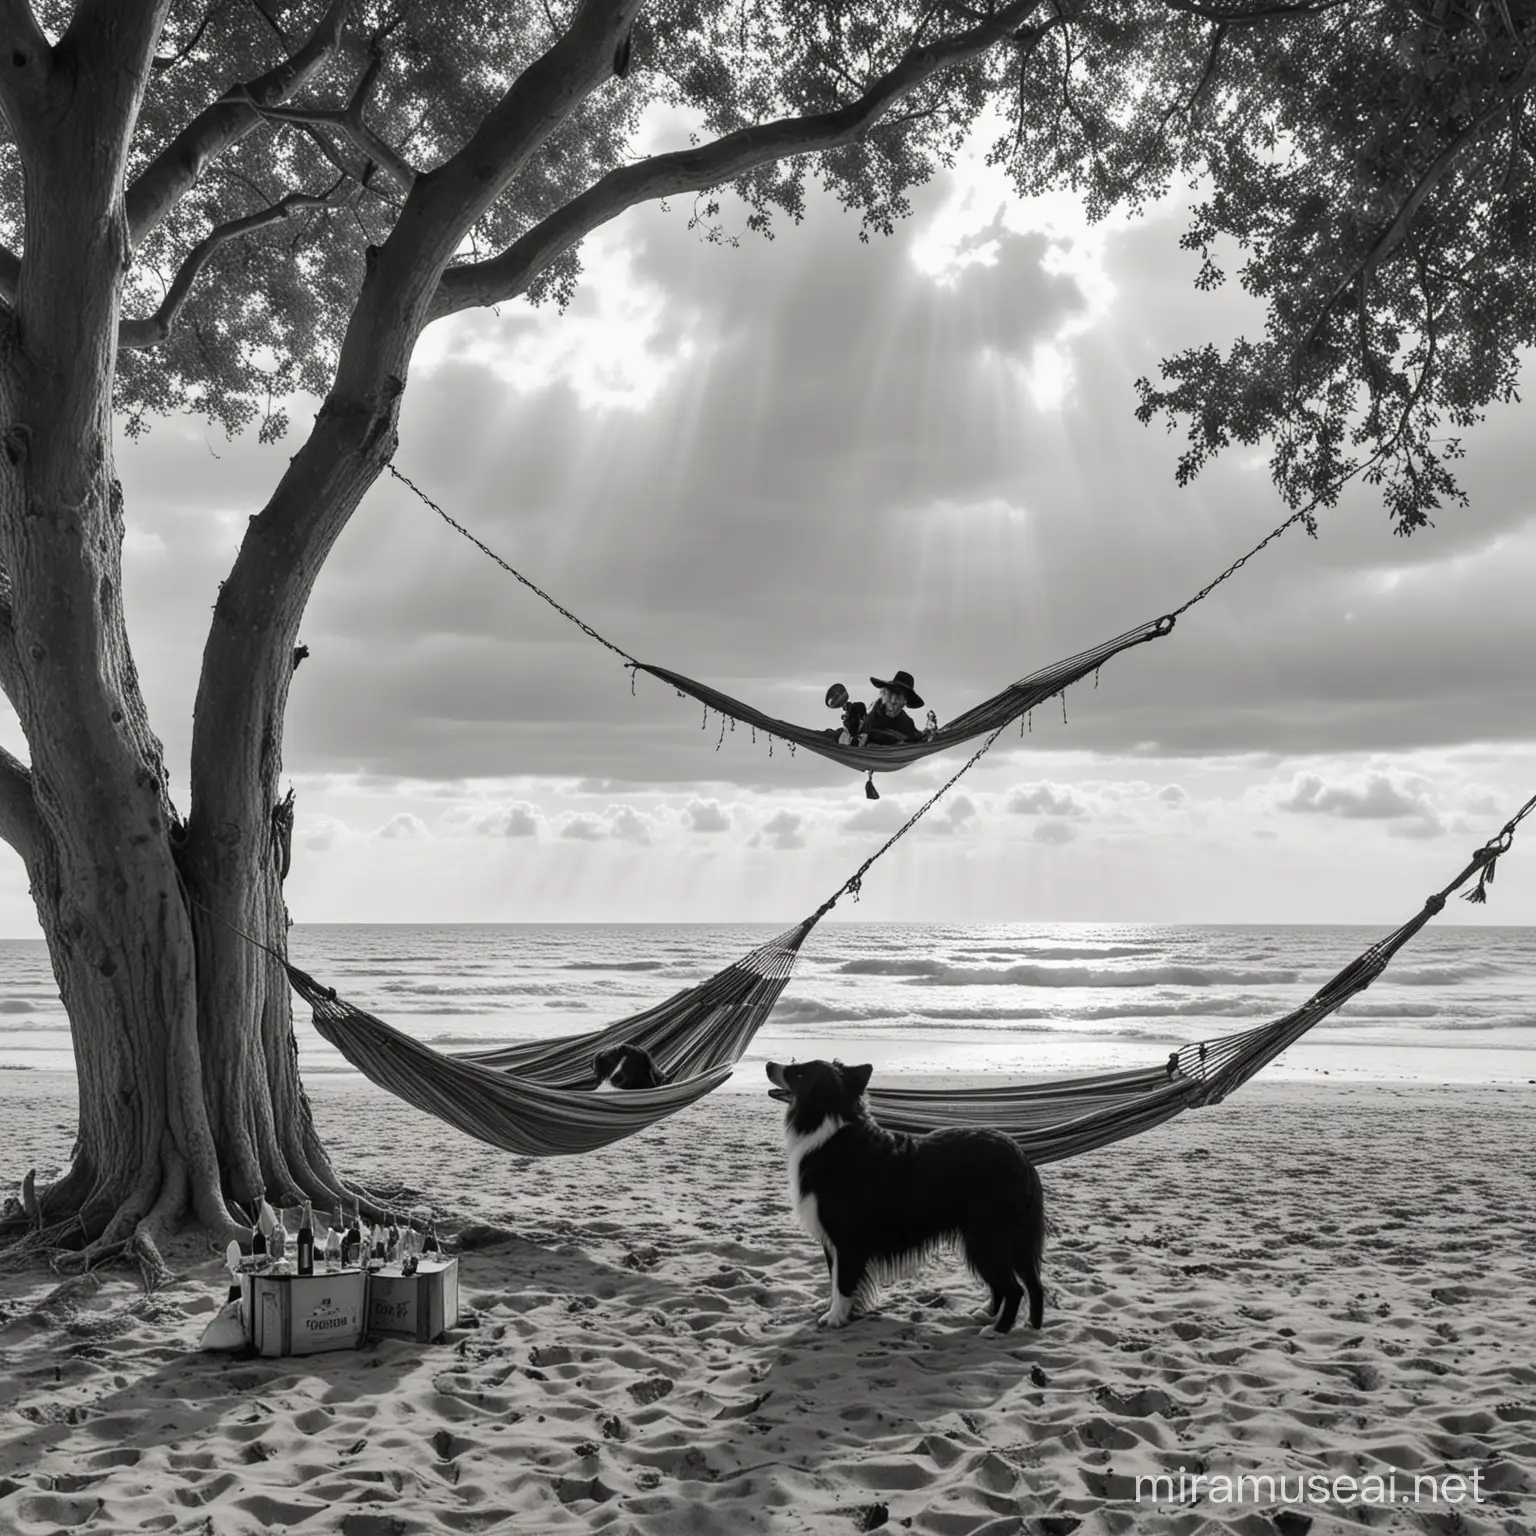 an old Englishman with a big straw hat sits in one hammock between old trees on a beach, and celebrating his seventy seventh birthday, a large black sea monster is swimming in the sea in the background and one black and white collie dog is sitting underneath the hammock, five empty wine bottles are in the sand under the hammock, the sun cast shadows but the clouds are dark and there is a heavy wind,